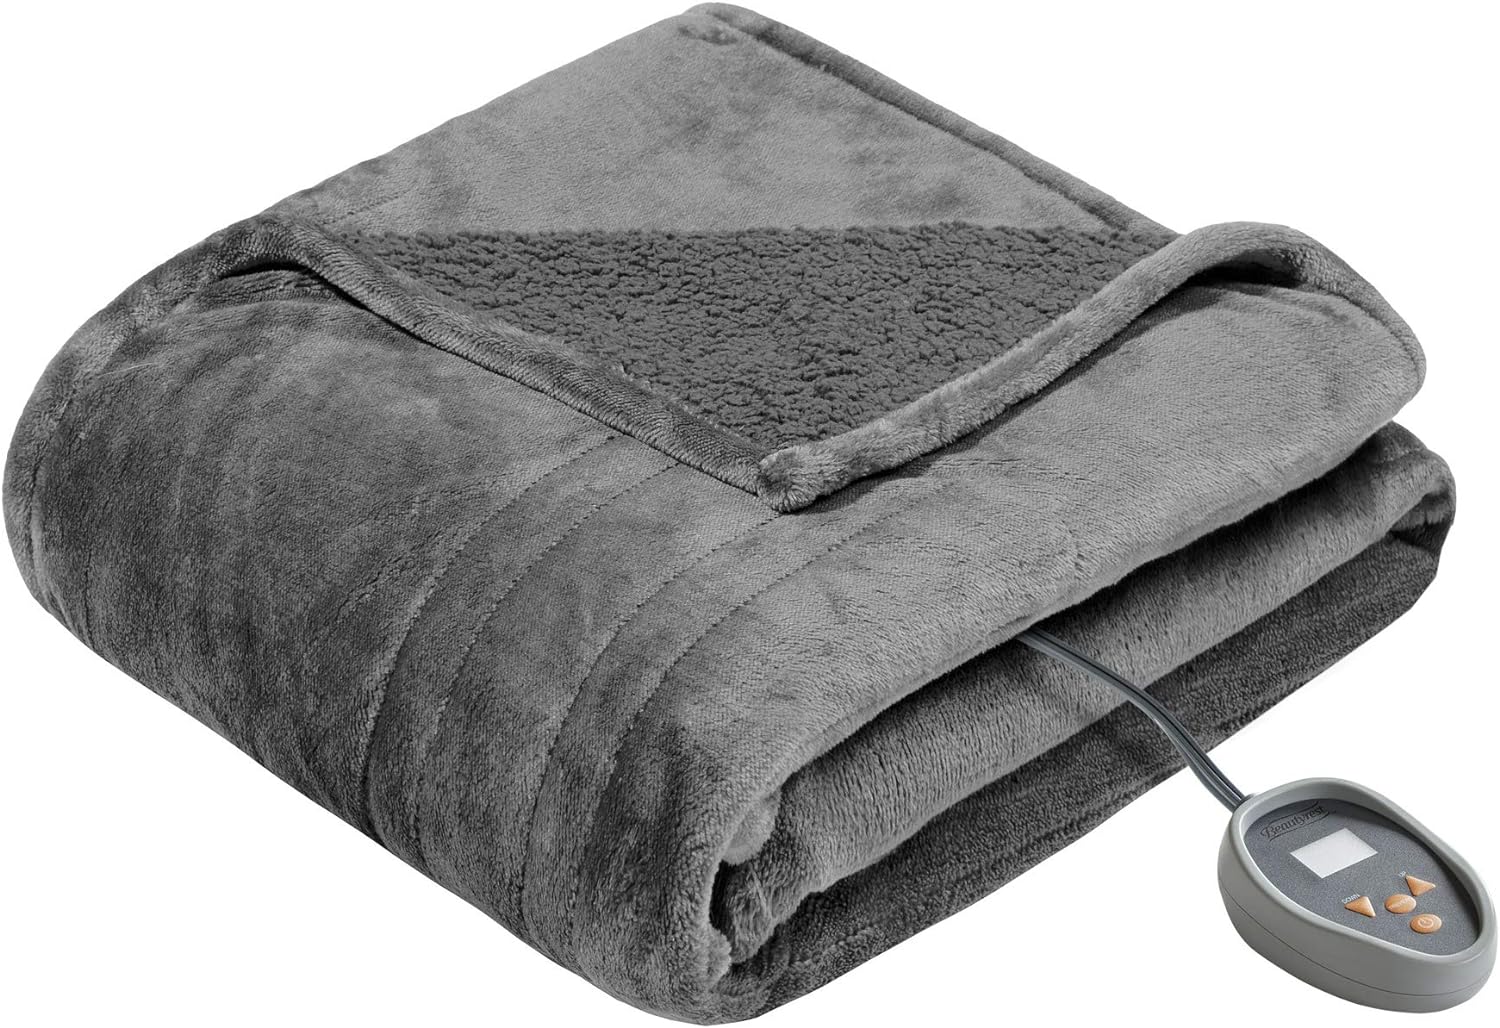 Beautyrest Electric Blanket with Two 20 Heat Level Setting Controllers, Queen: 84x90, Grey,BR54-0418